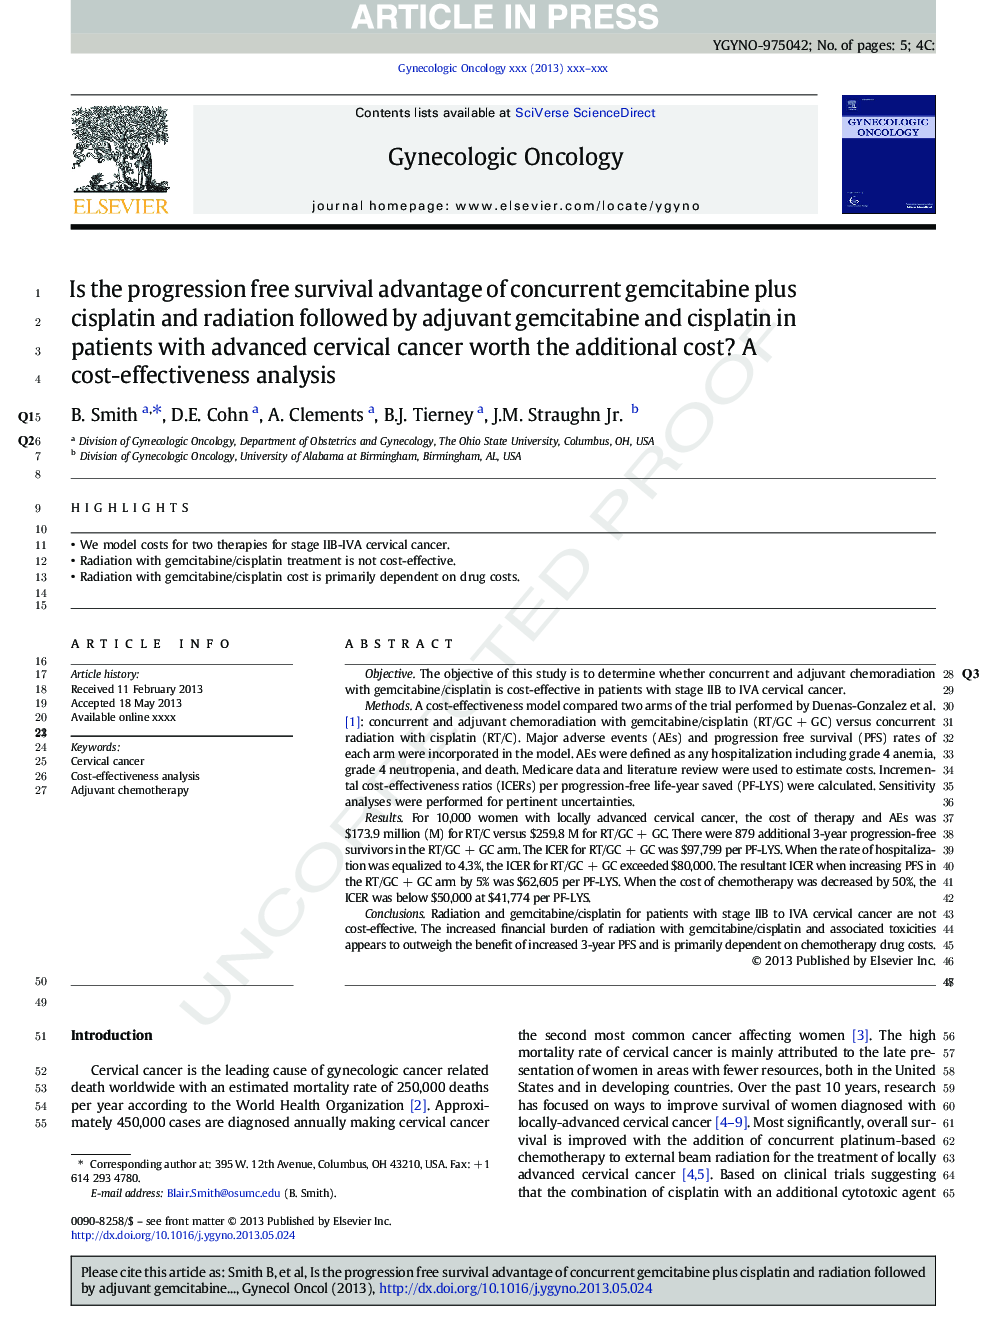 Is the progression free survival advantage of concurrent gemcitabine plus cisplatin and radiation followed by adjuvant gemcitabine and cisplatin in patients with advanced cervical cancer worth the additional cost? A cost-effectiveness analysis